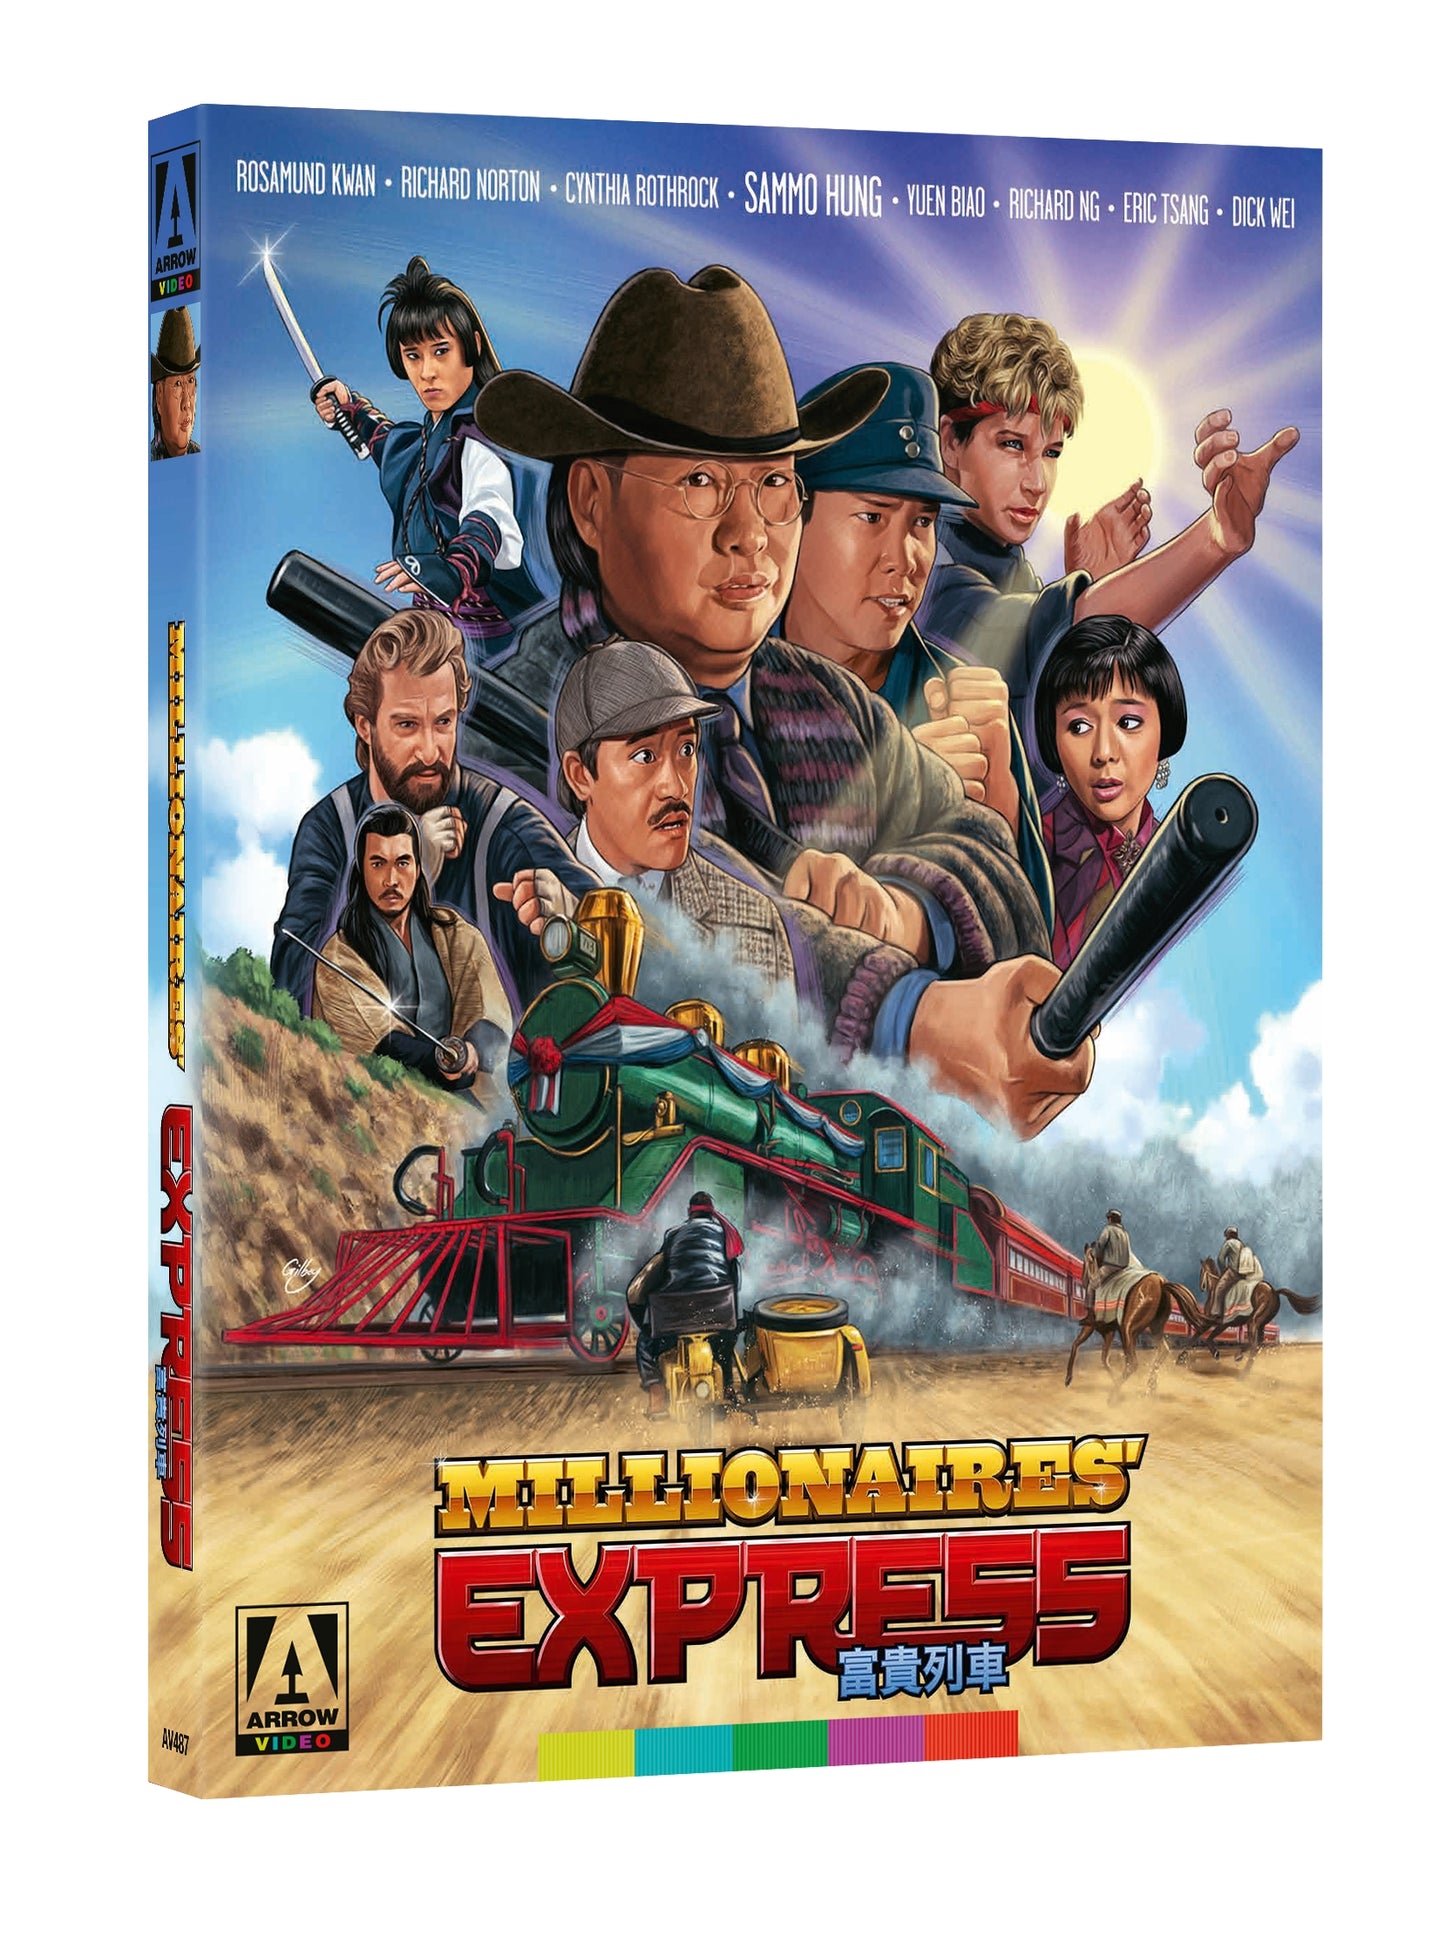 Millionaires' Express Blu-ray Limited Edition with Slipcover (Arrow U.S.)